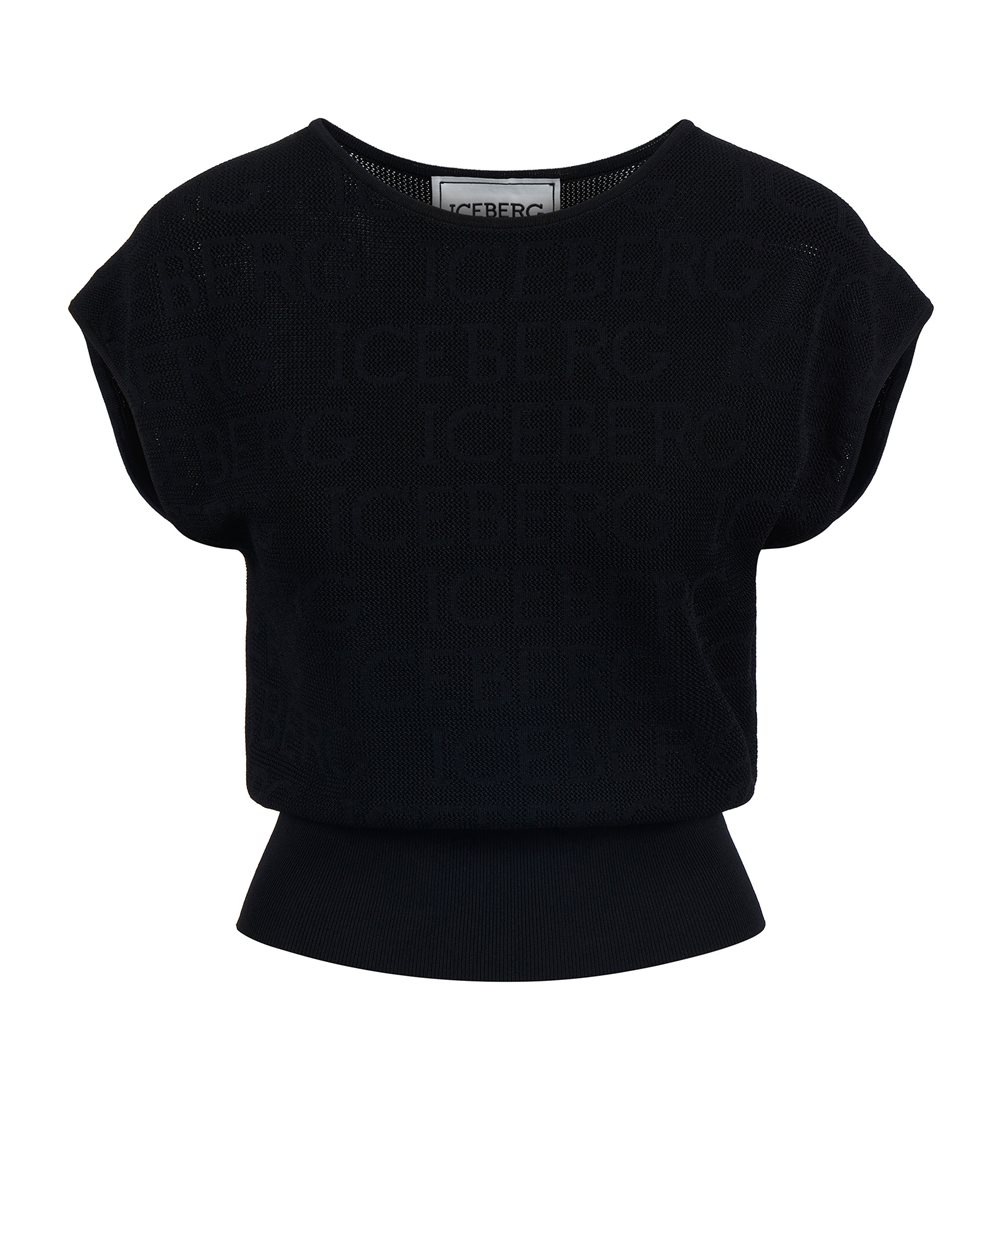 Crop top with logo - Woman | Iceberg - Official Website